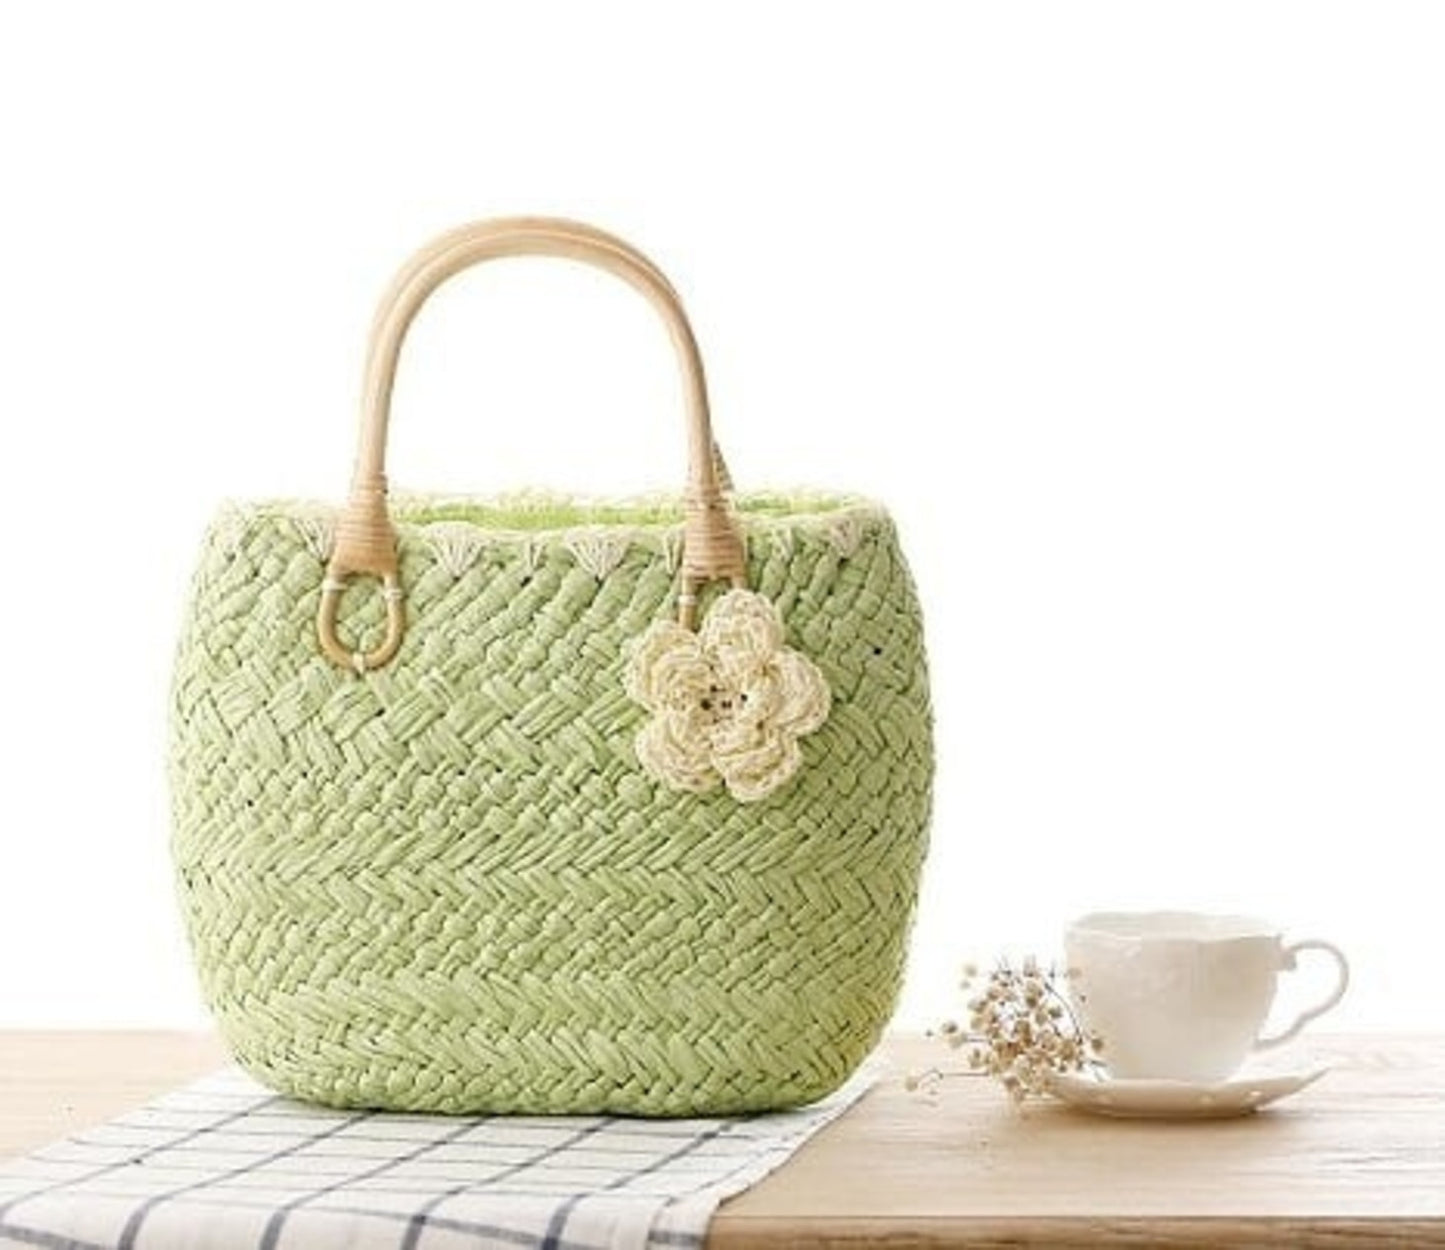 Straw Purse with Rattan Handles by Coseey